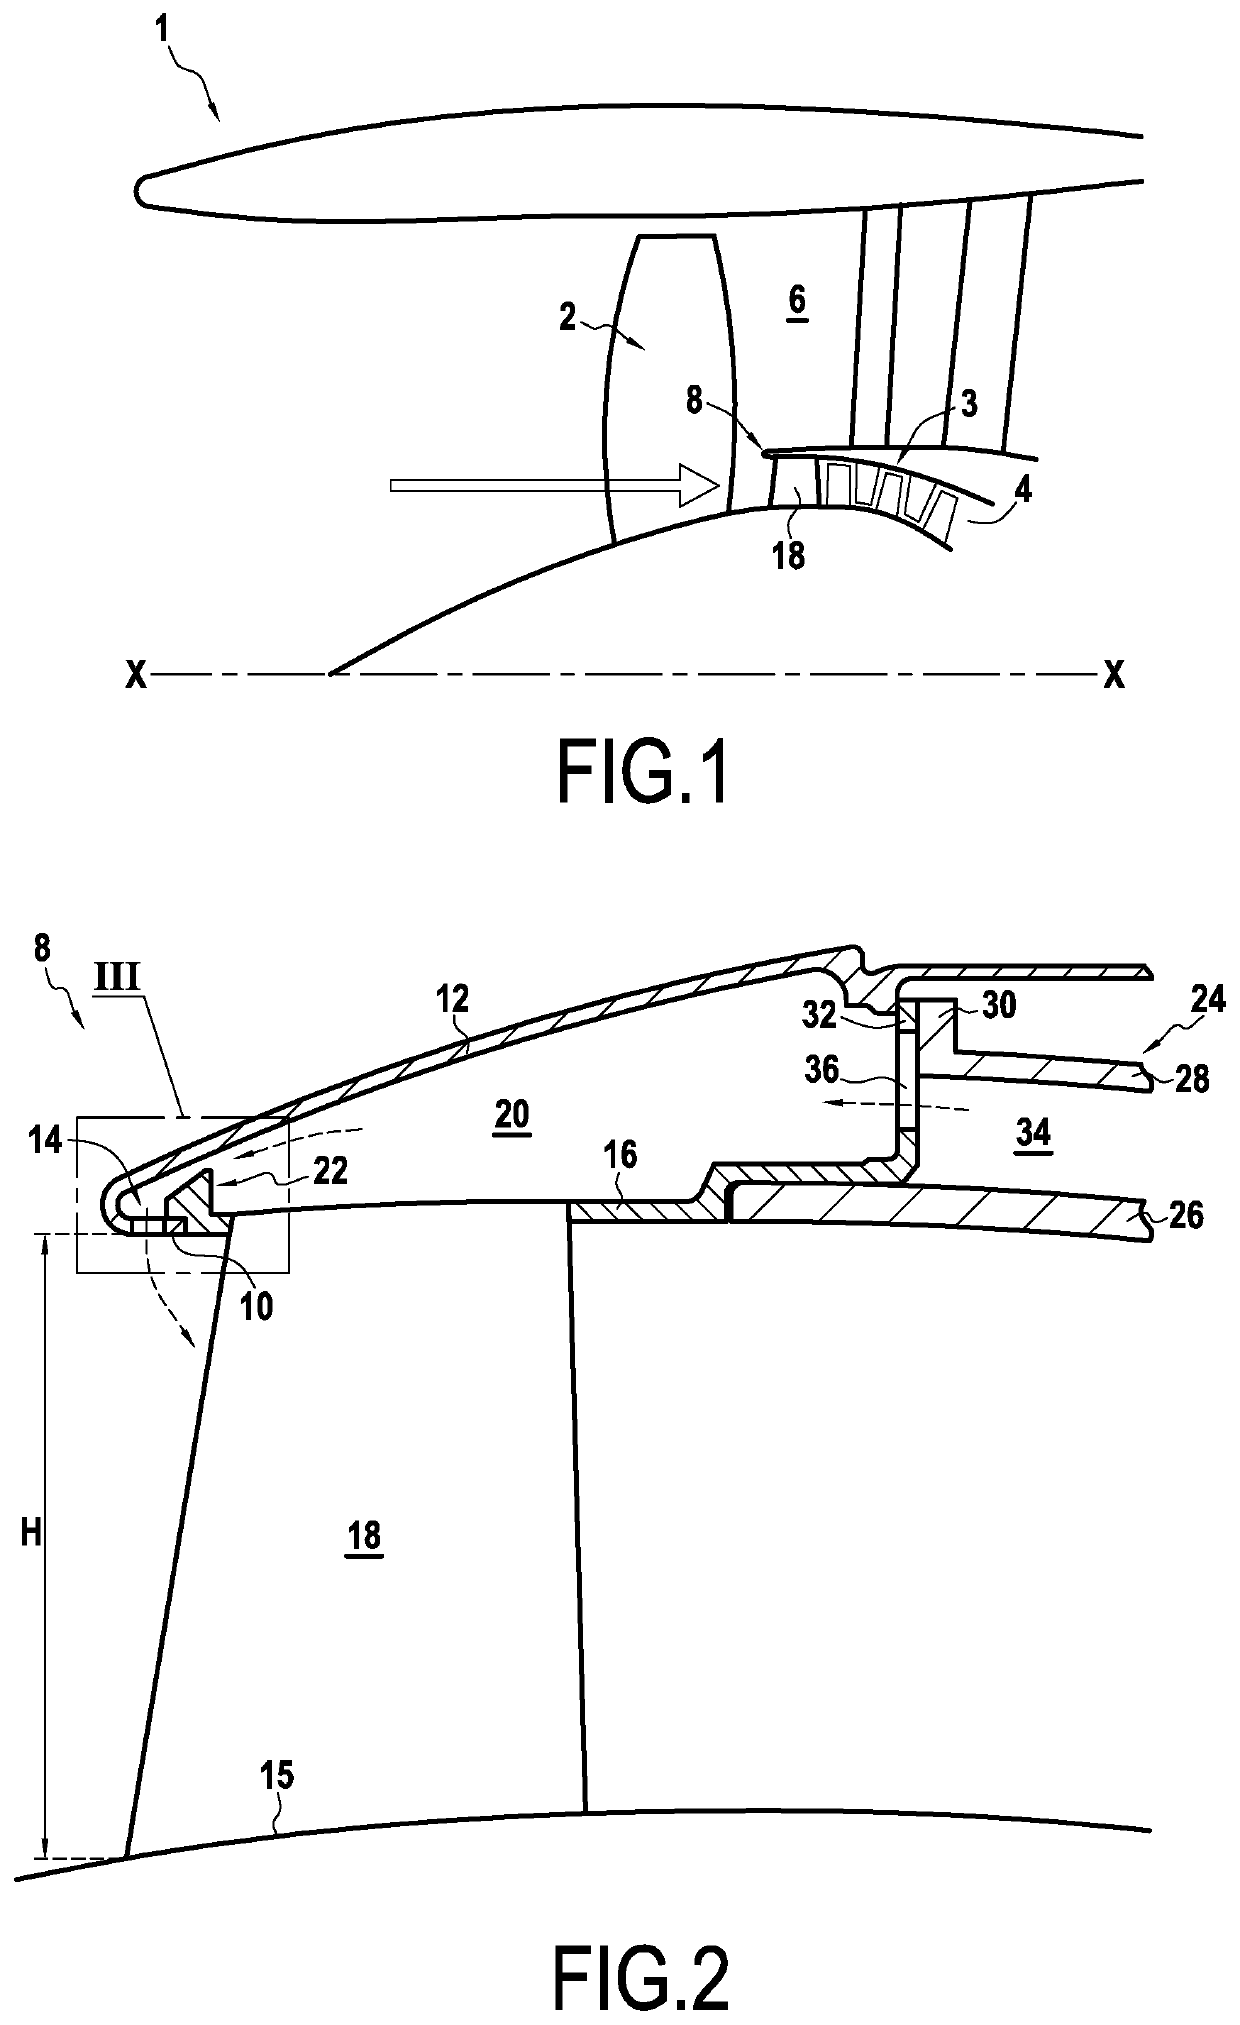 Device for deicing a splitter nose and inlet guide vanes of an aviation turbine engine